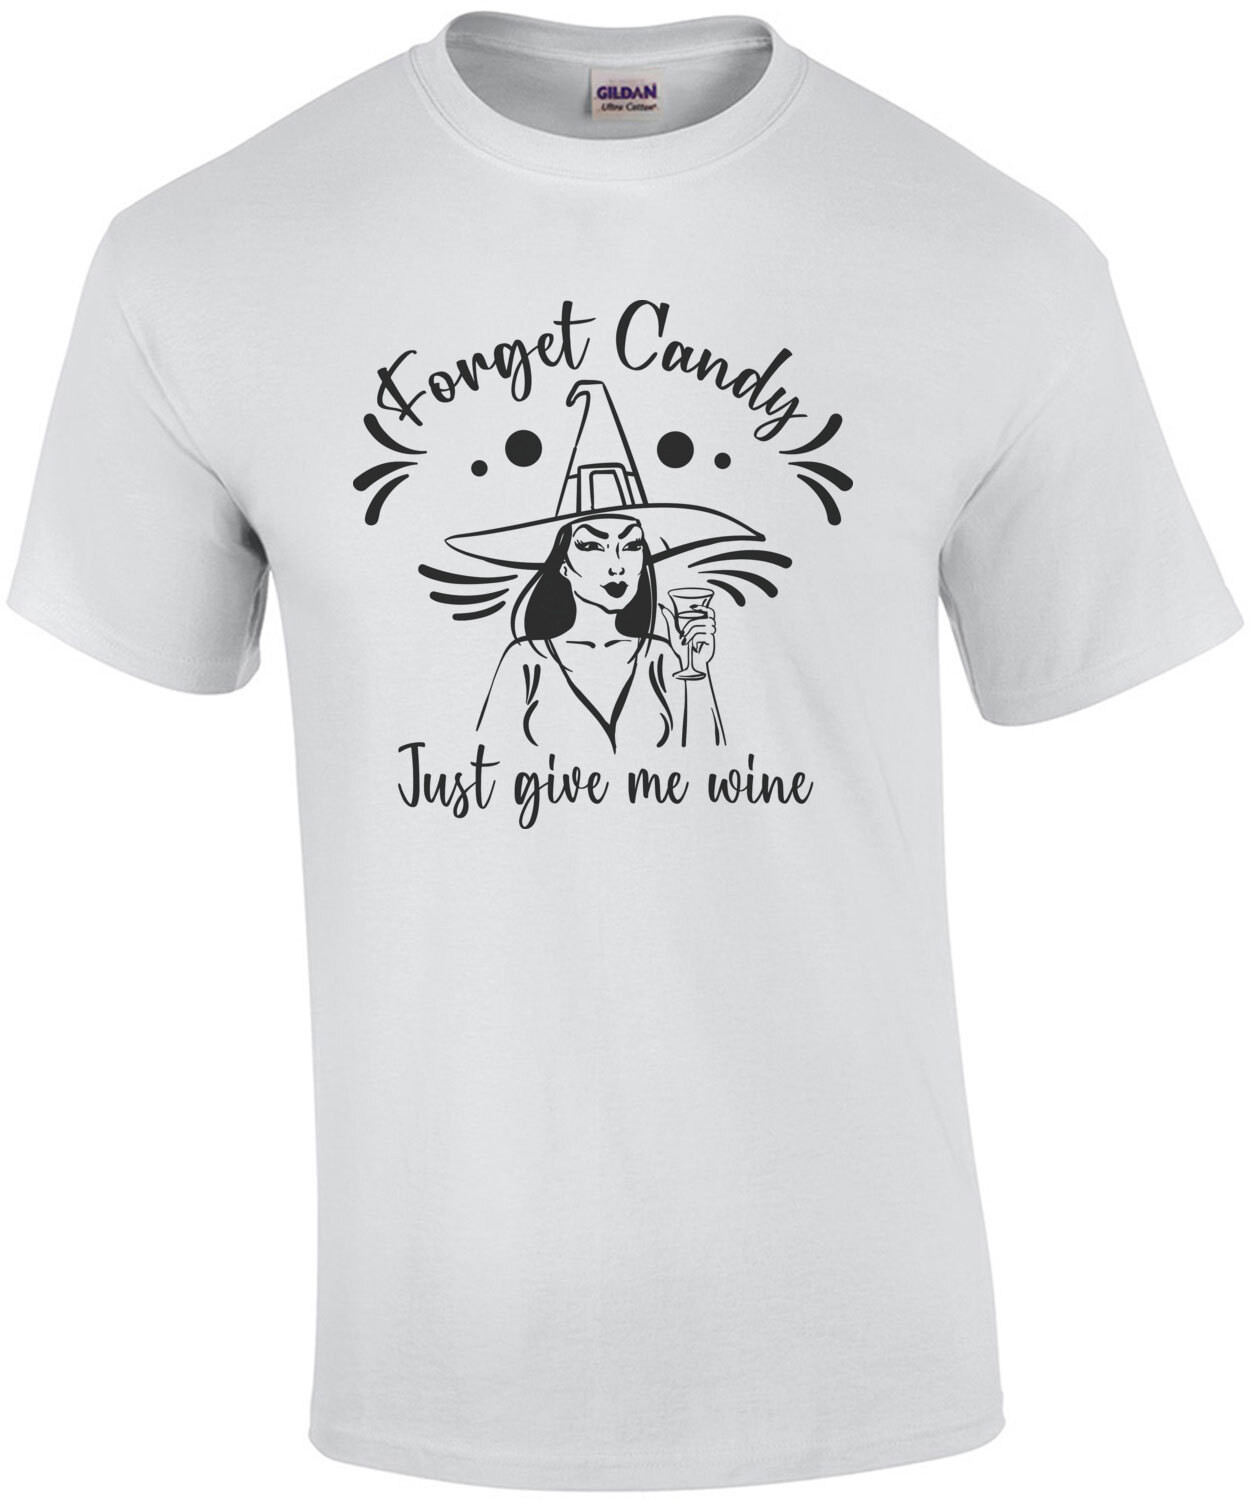 Forget Candy... Just Give Me The Wine! - Drinking Halloween Shirt